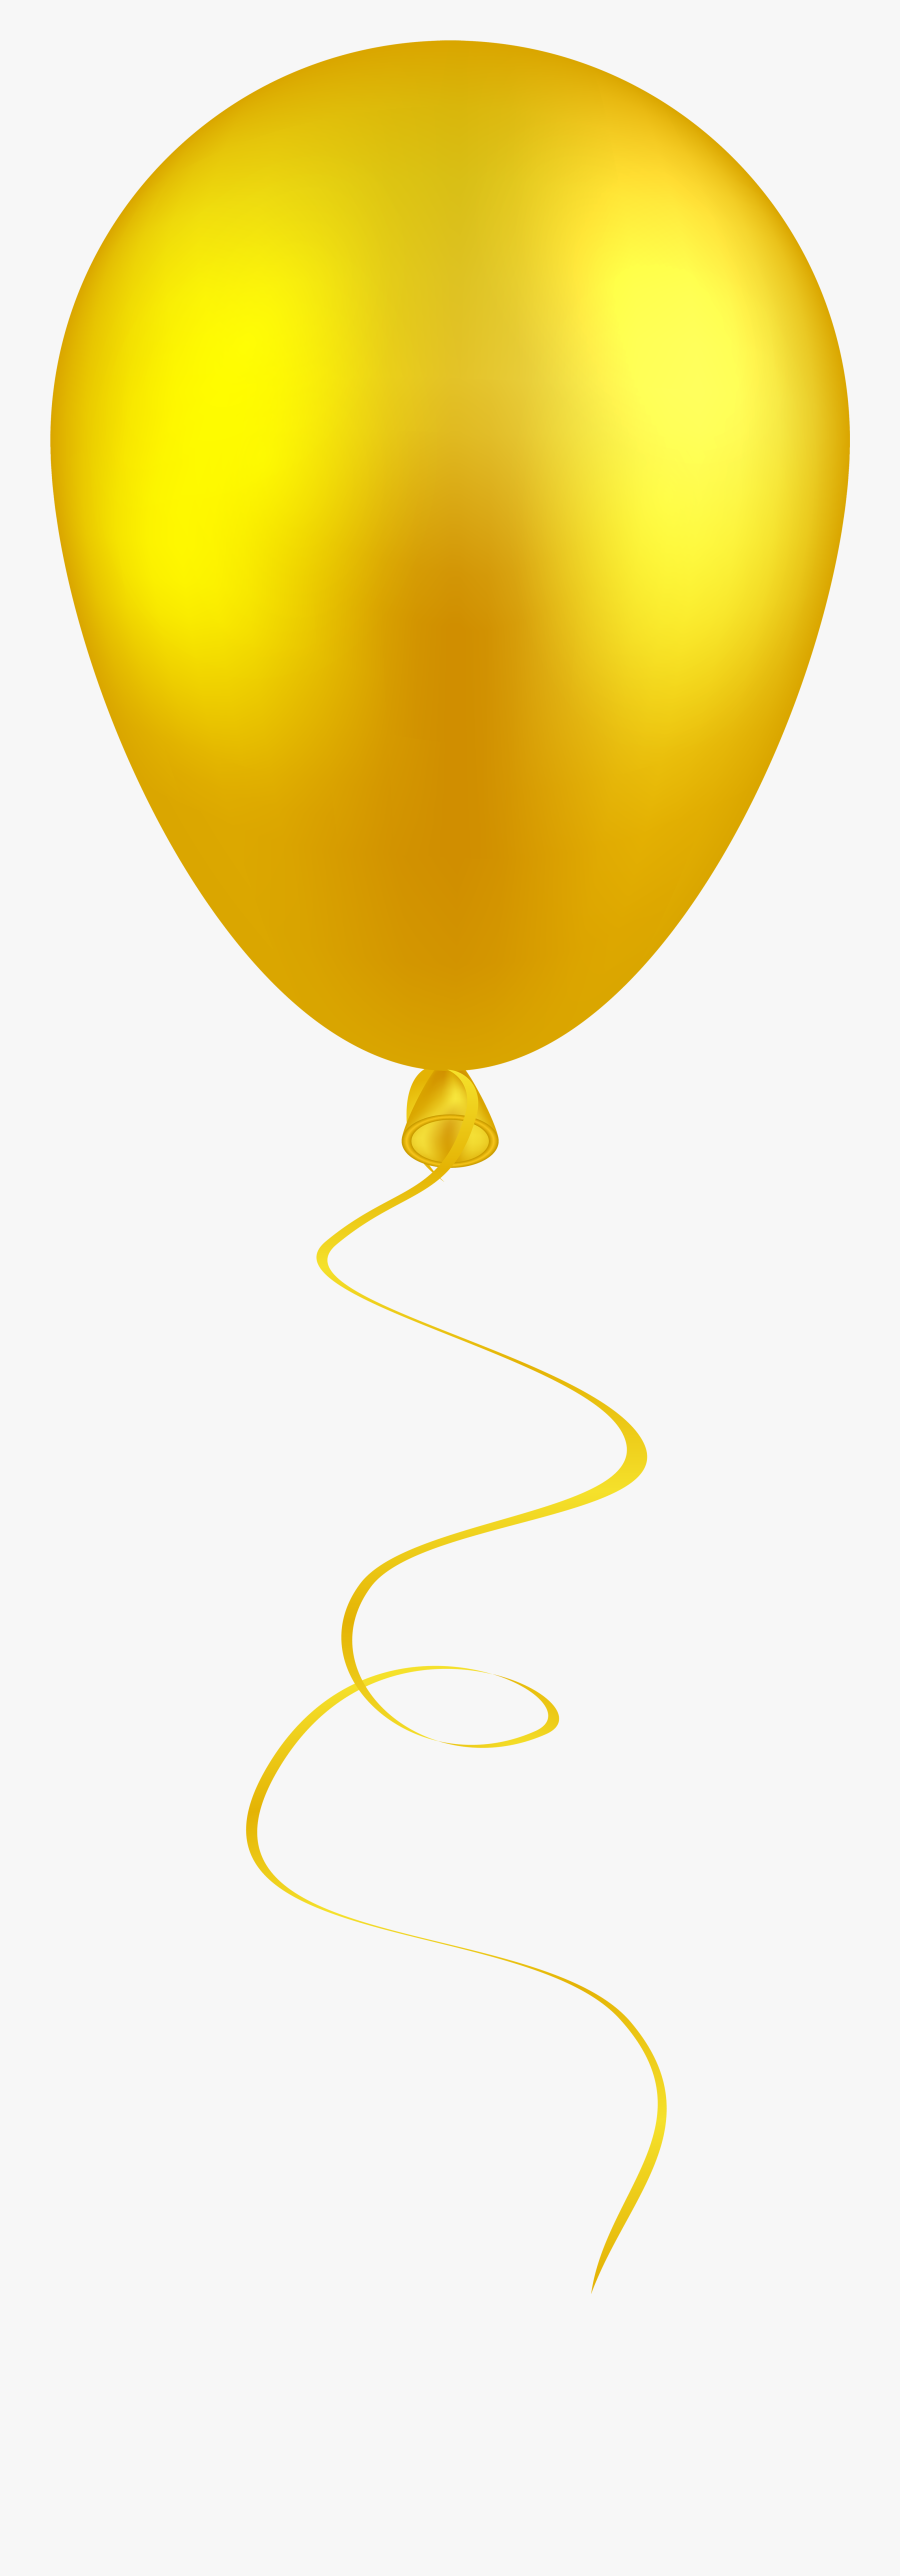 Yellow Gold Balloon Png , Free Transparent Clipart - ClipartKey